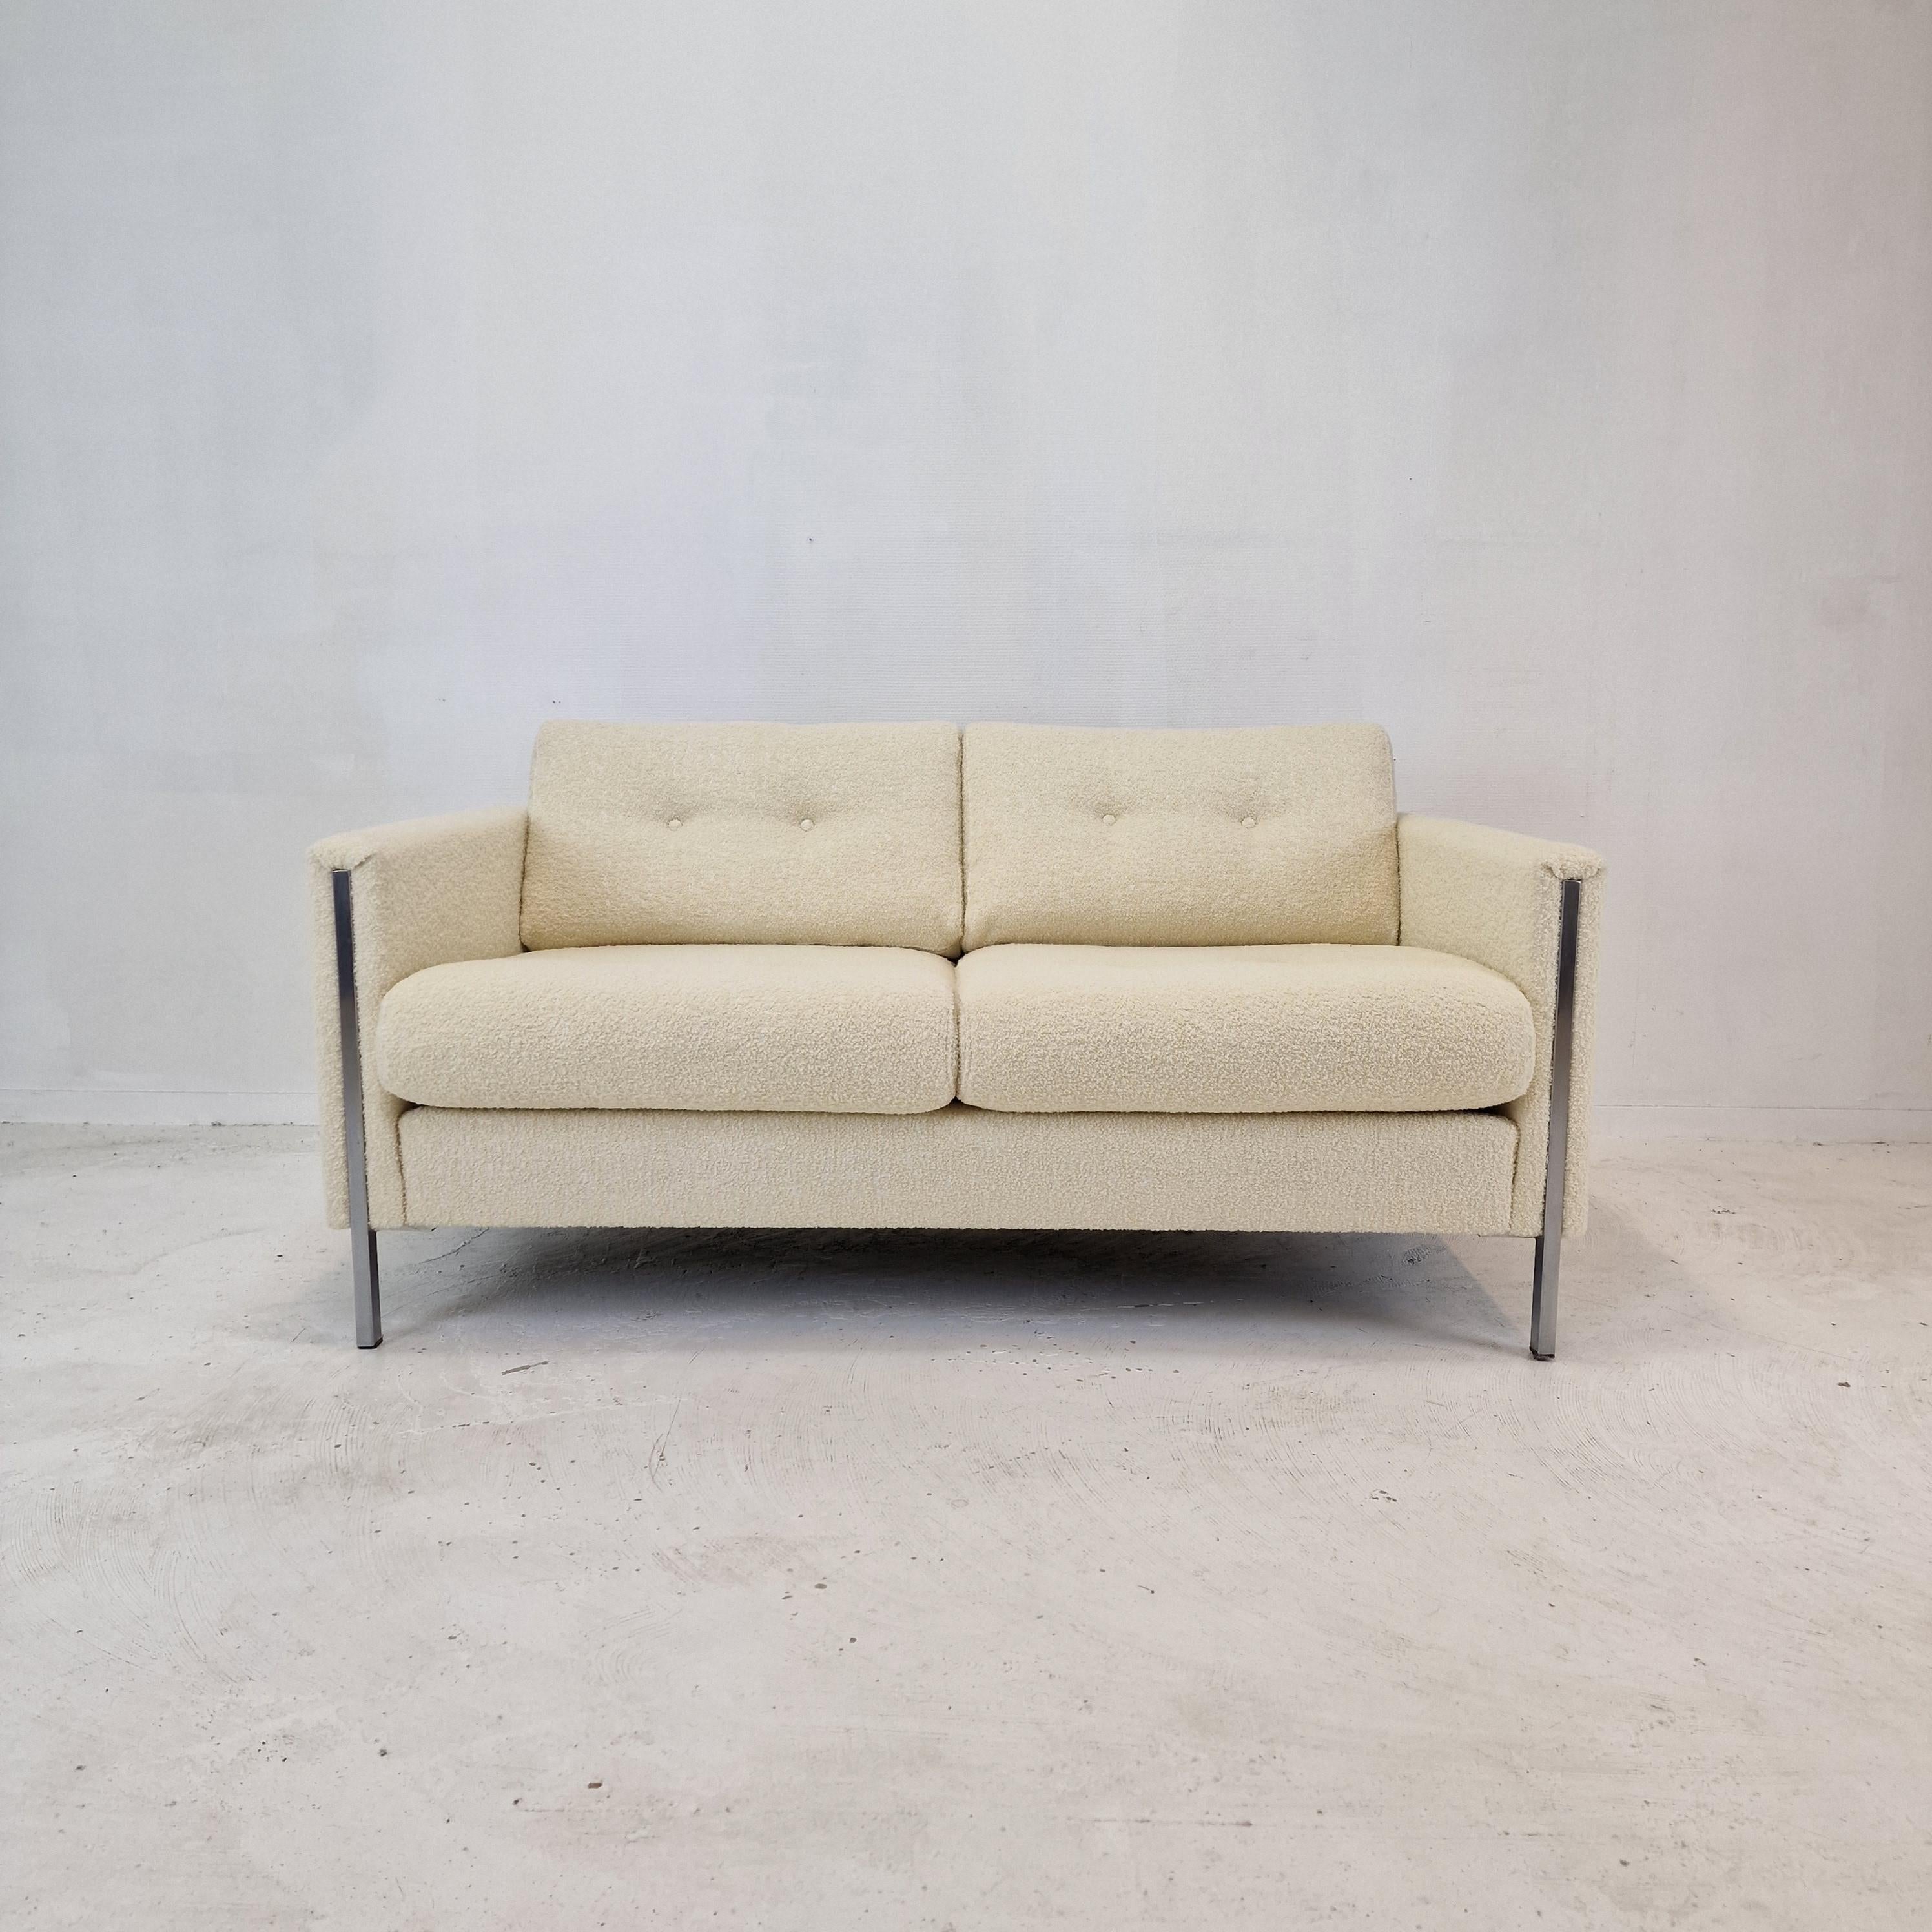 Mid-Century Modern Midcentury 2-Seat Model 442 Sofa by Pierre Paulin for Artifort, 1960s For Sale